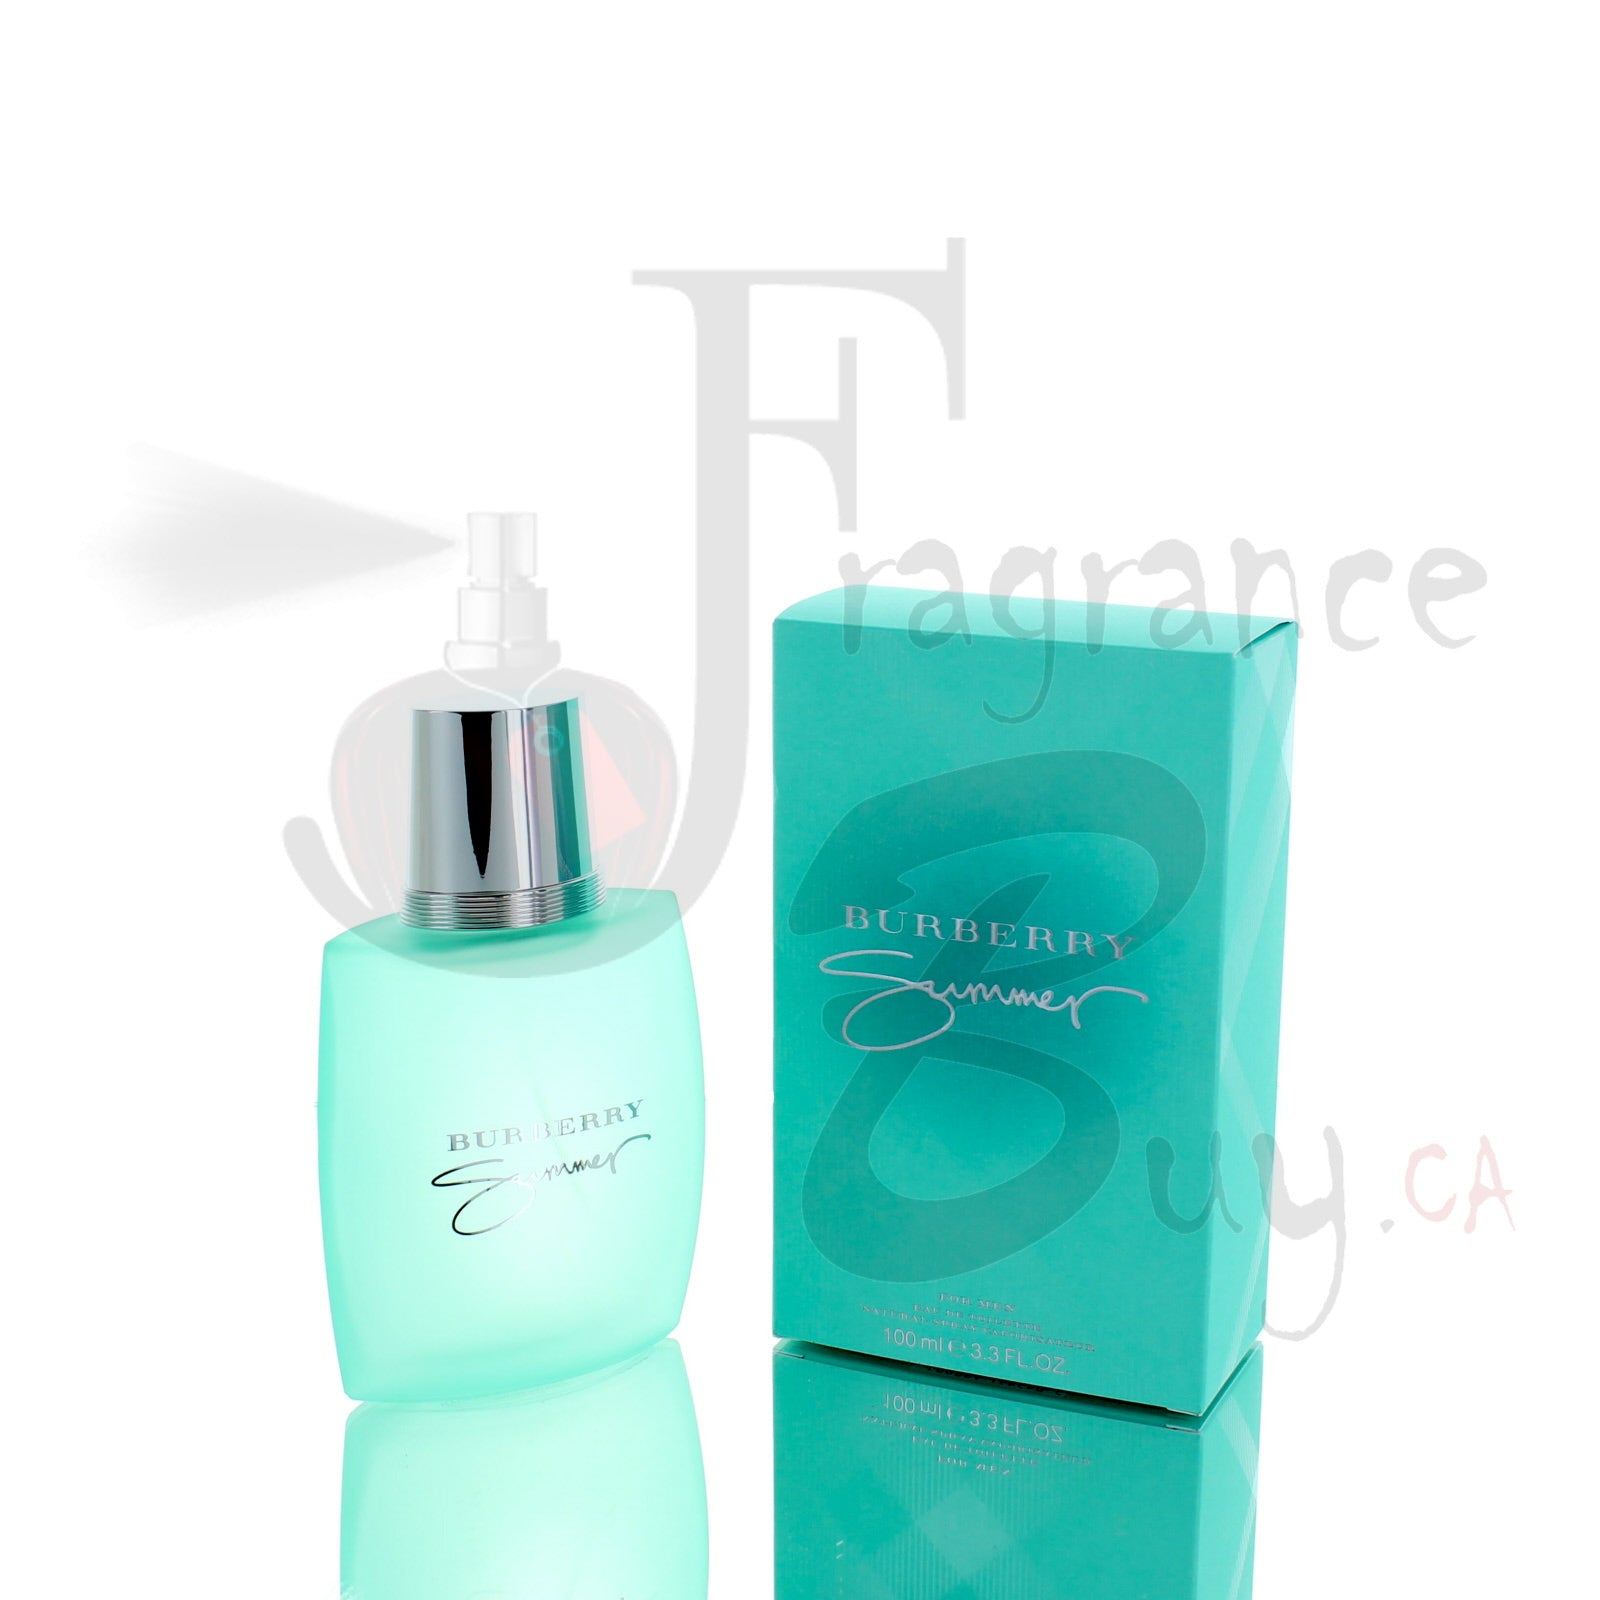  — Burberry Summer Man Cologne | Best Price Online |  